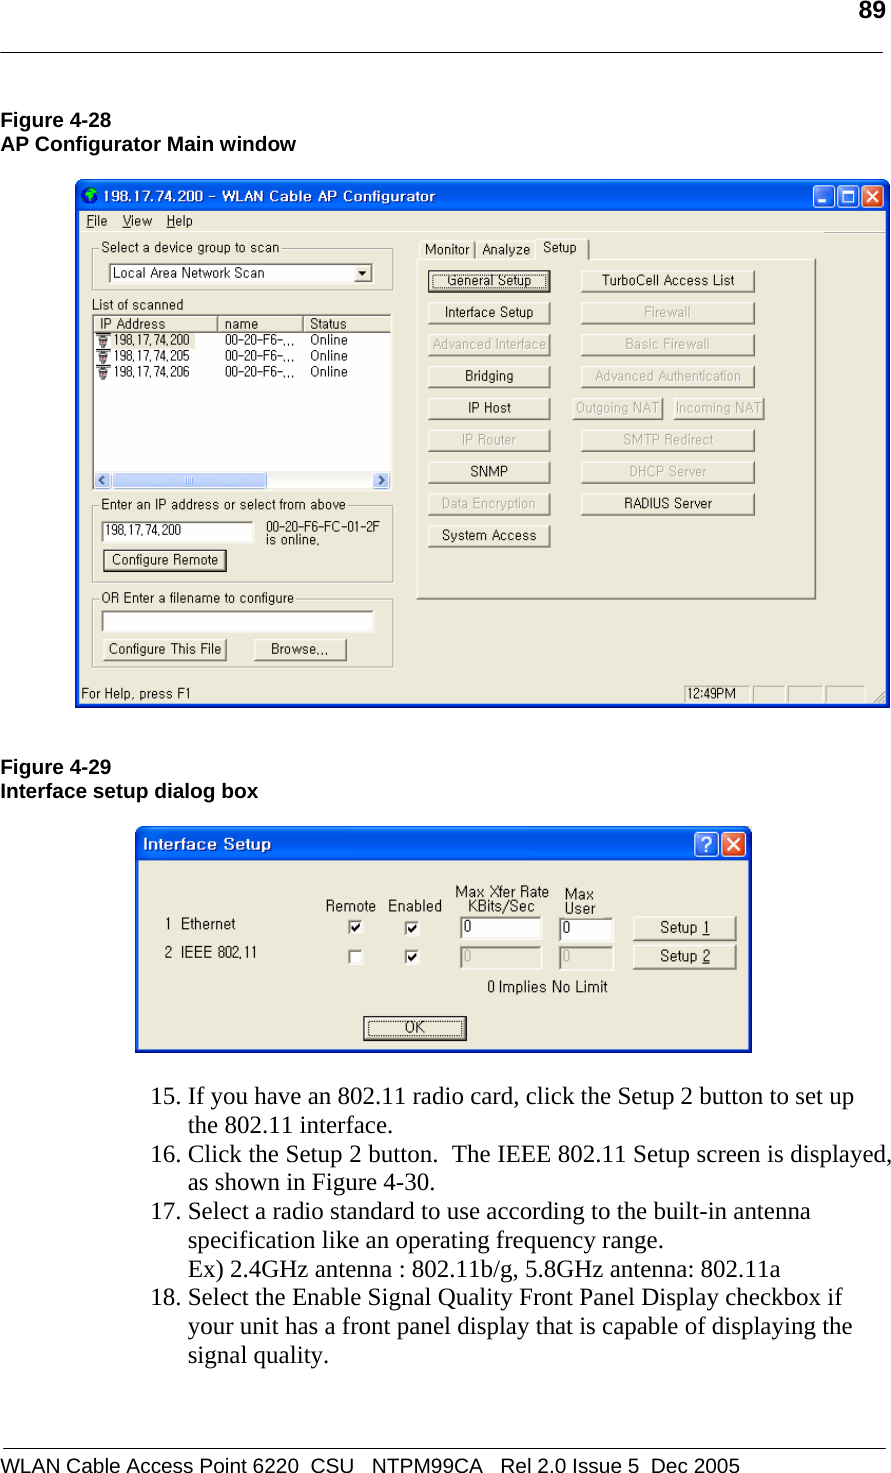   89  WLAN Cable Access Point 6220  CSU   NTPM99CA   Rel 2.0 Issue 5  Dec 2005 Figure 4-28 AP Configurator Main window     Figure 4-29 Interface setup dialog box    15. If you have an 802.11 radio card, click the Setup 2 button to set up the 802.11 interface. 16. Click the Setup 2 button.  The IEEE 802.11 Setup screen is displayed, as shown in Figure 4-30. 17. Select a radio standard to use according to the built-in antenna specification like an operating frequency range.  Ex) 2.4GHz antenna : 802.11b/g, 5.8GHz antenna: 802.11a  18. Select the Enable Signal Quality Front Panel Display checkbox if your unit has a front panel display that is capable of displaying the signal quality.   